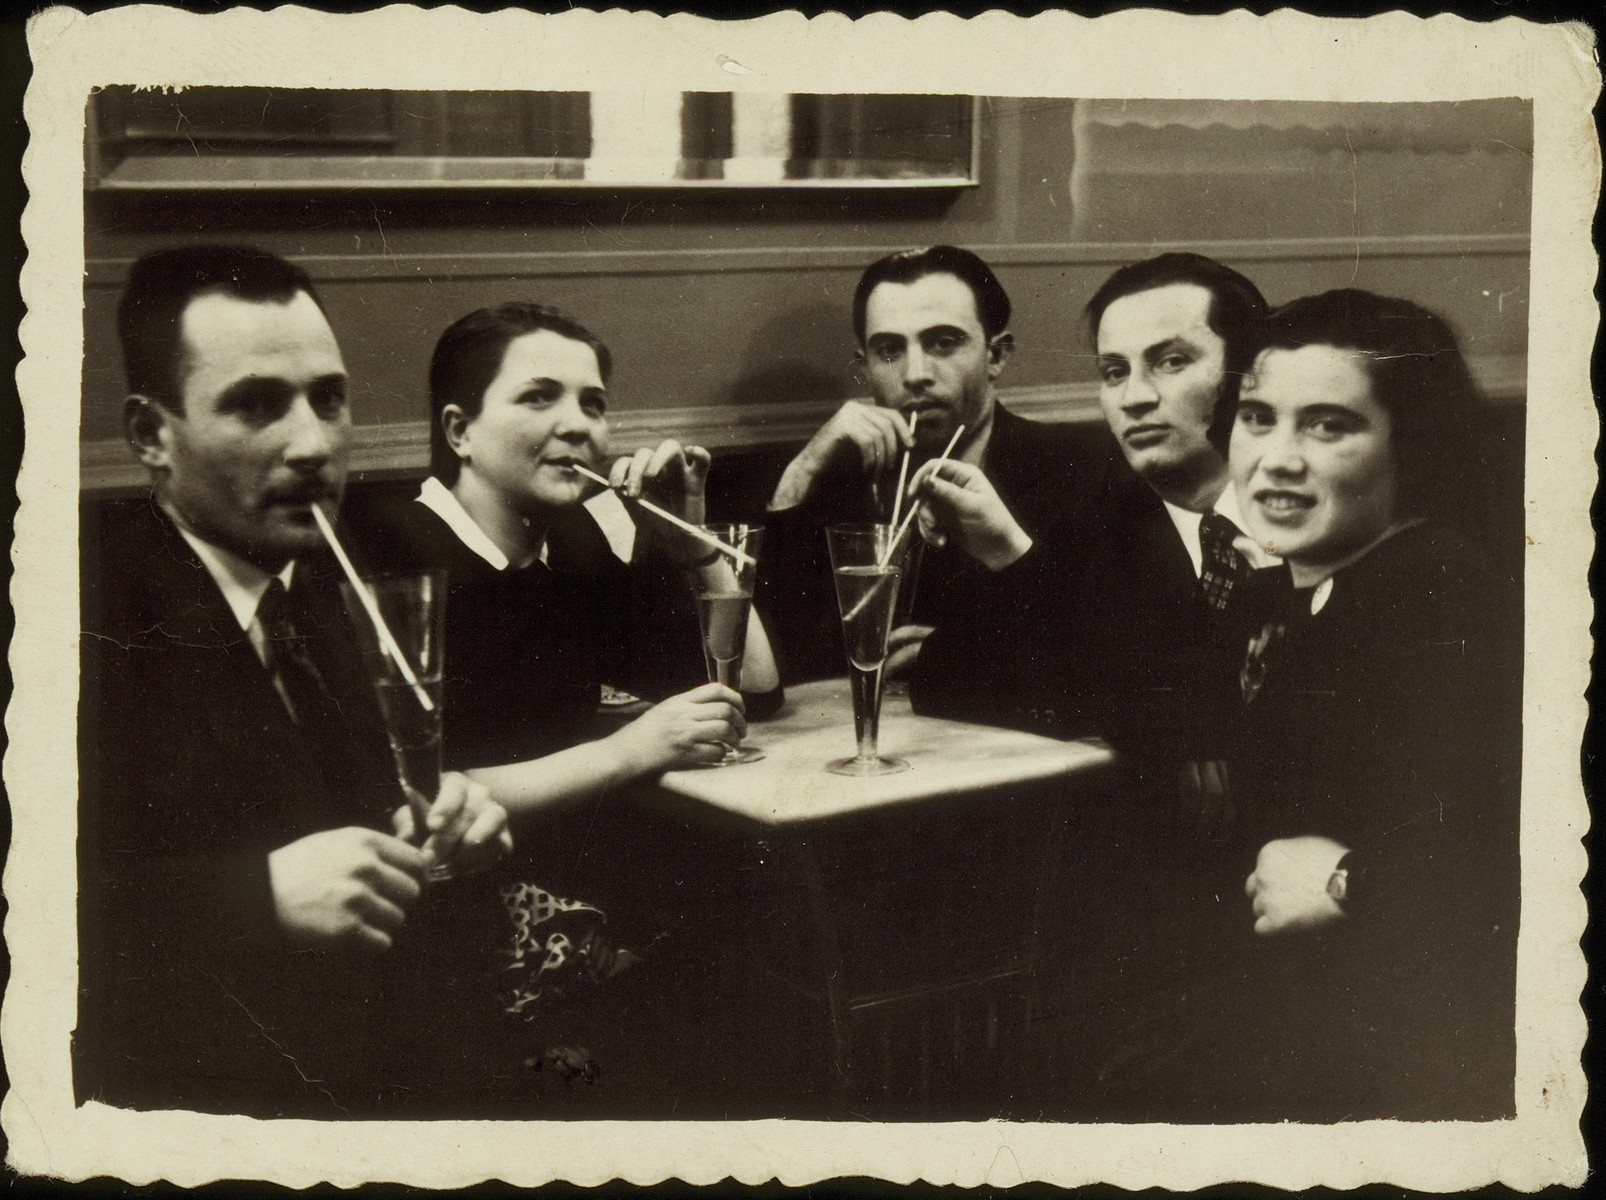 Etchke Jurdyczanski celebrates his plans to immigrate to Palestine in a restaurant in Vilna. 

Etchke Jurdyczanski (Isaac Juris), is second from right.  He survived the Holocaust in Siberia, and the fate of the others is unknown.